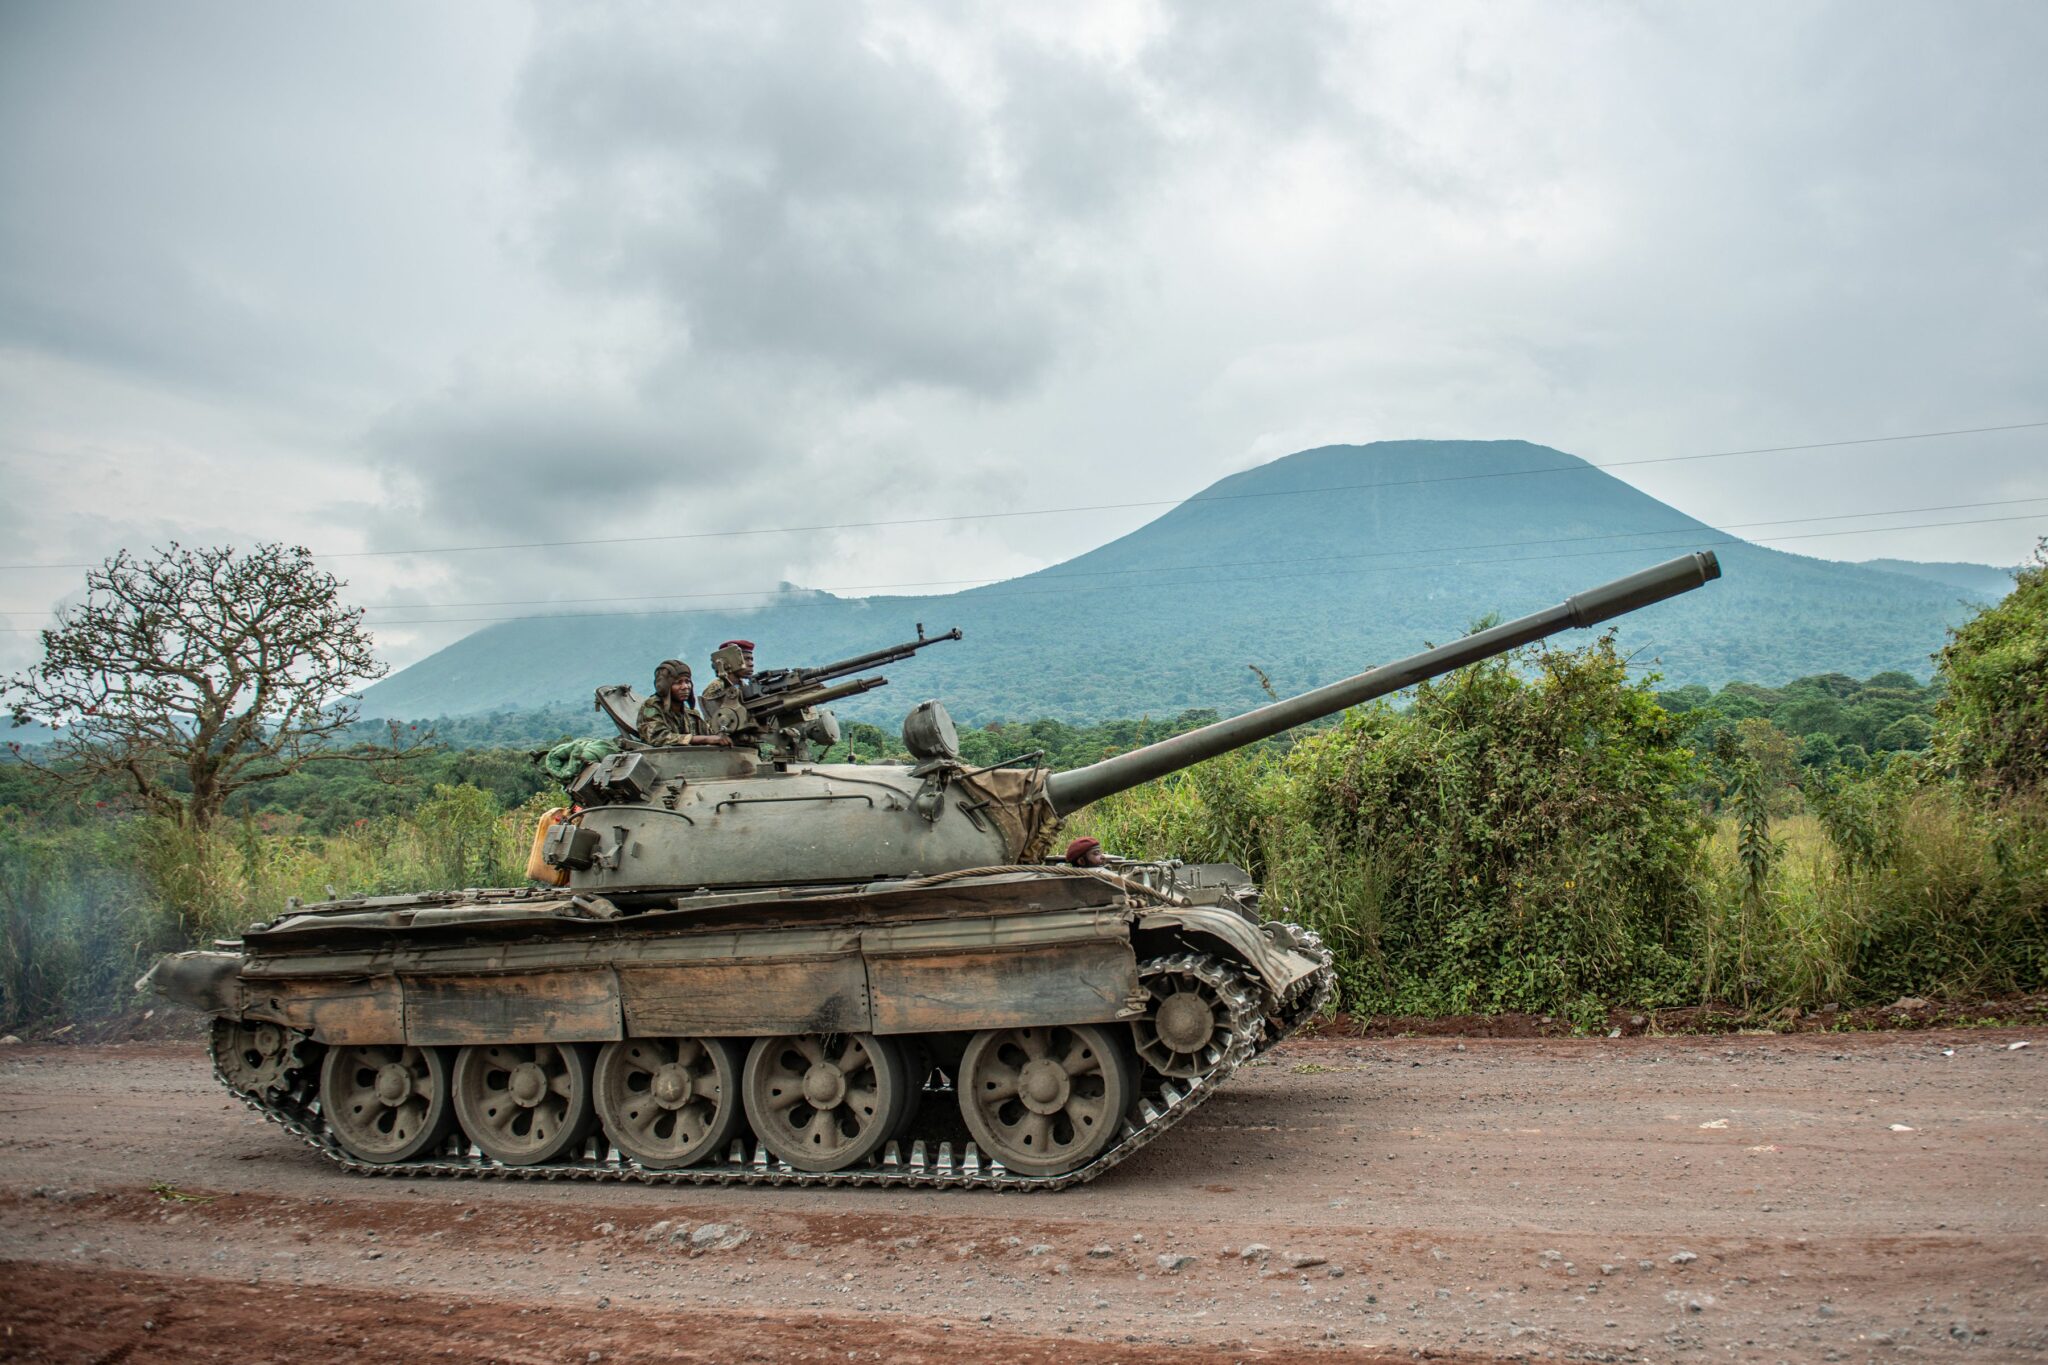 TOPSHOT - A Congolese army tank heads towards the front line near Kibumba in the area surrounding the North Kivu city of Goma on May 25, 2022 during clashes between the Congolese army and M23 rebels. - DR Congo soldiers fought M23 militiamen on several fronts in the troubled east of the country Wednesday, military and local officials said, with the government appearing to implicate Rwanda in the violent flare-up. (Photo by Arlette Bashizi / AFP) (Photo by ARLETTE BASHIZI/AFP via Getty Images)